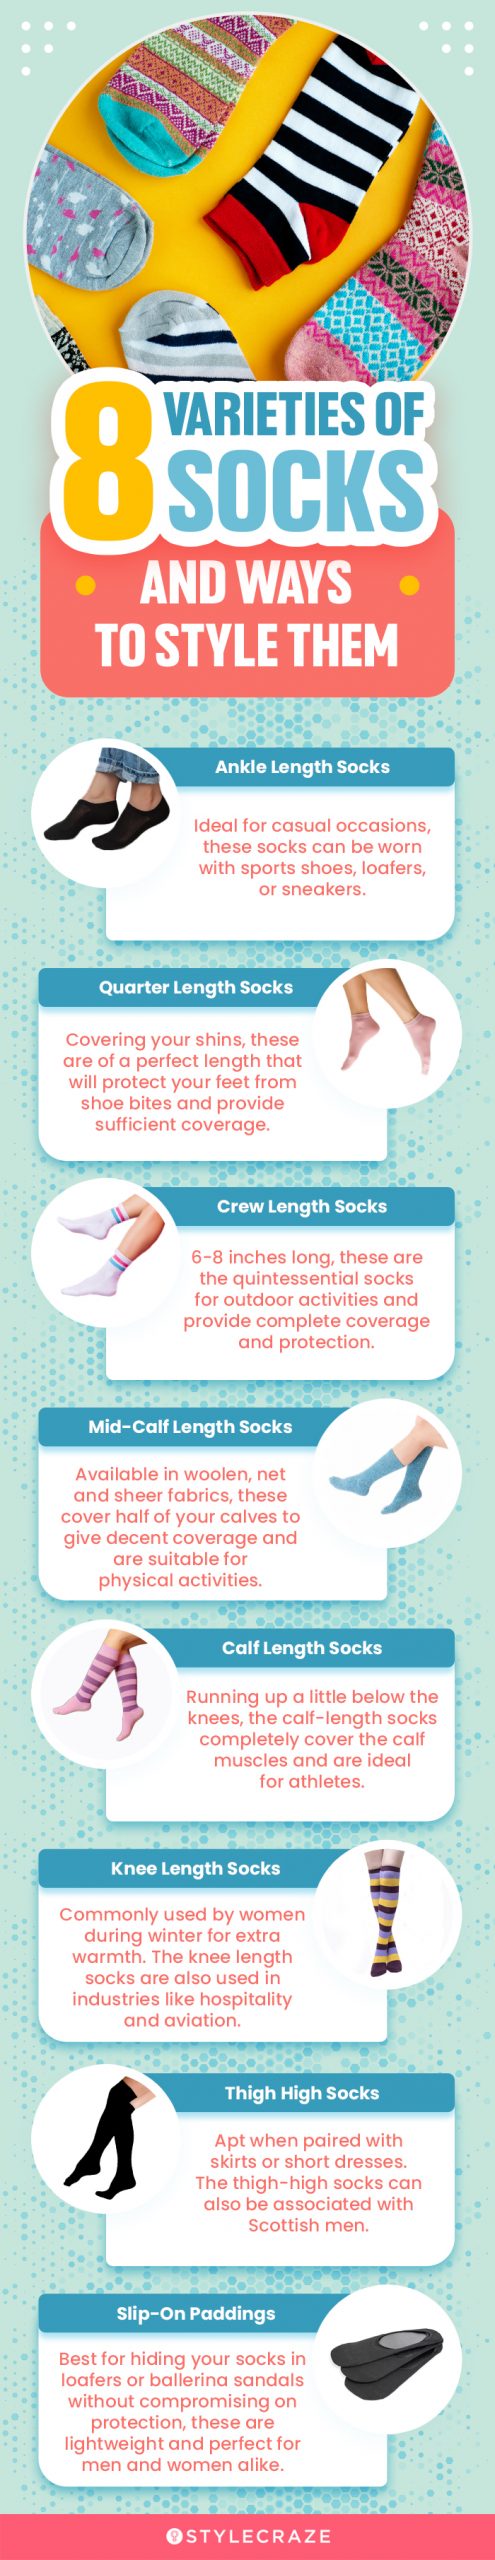 8 varieties of socks and ways to style them (infographic)